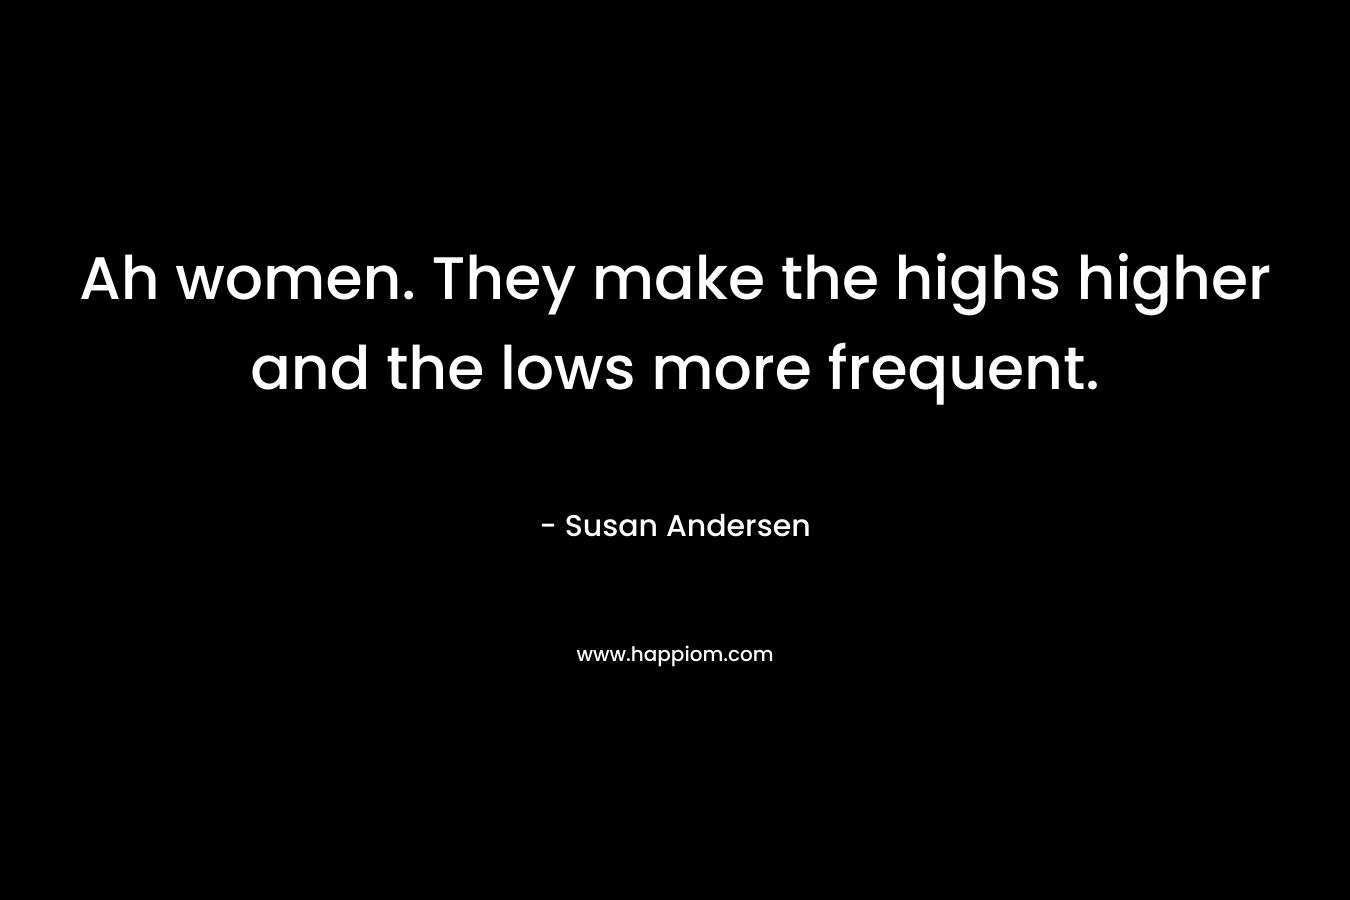 Ah women. They make the highs higher and the lows more frequent.